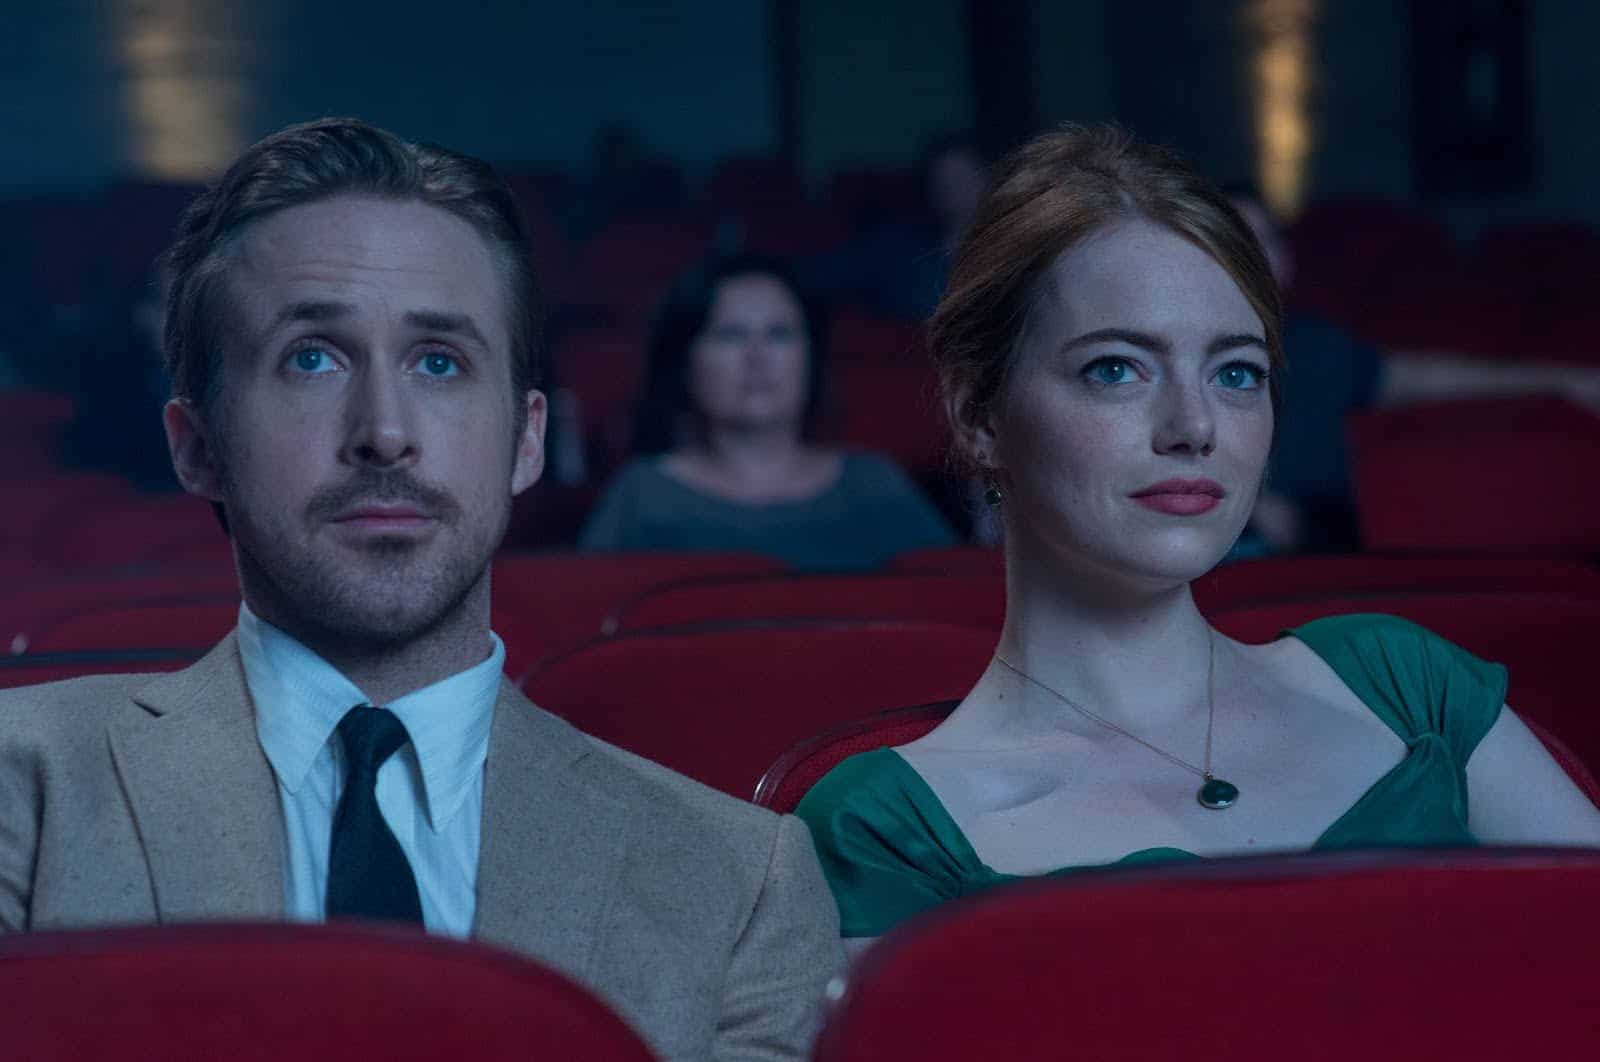 A vintage man and woman sit in a movie theater in this image from Summit Entertainment.